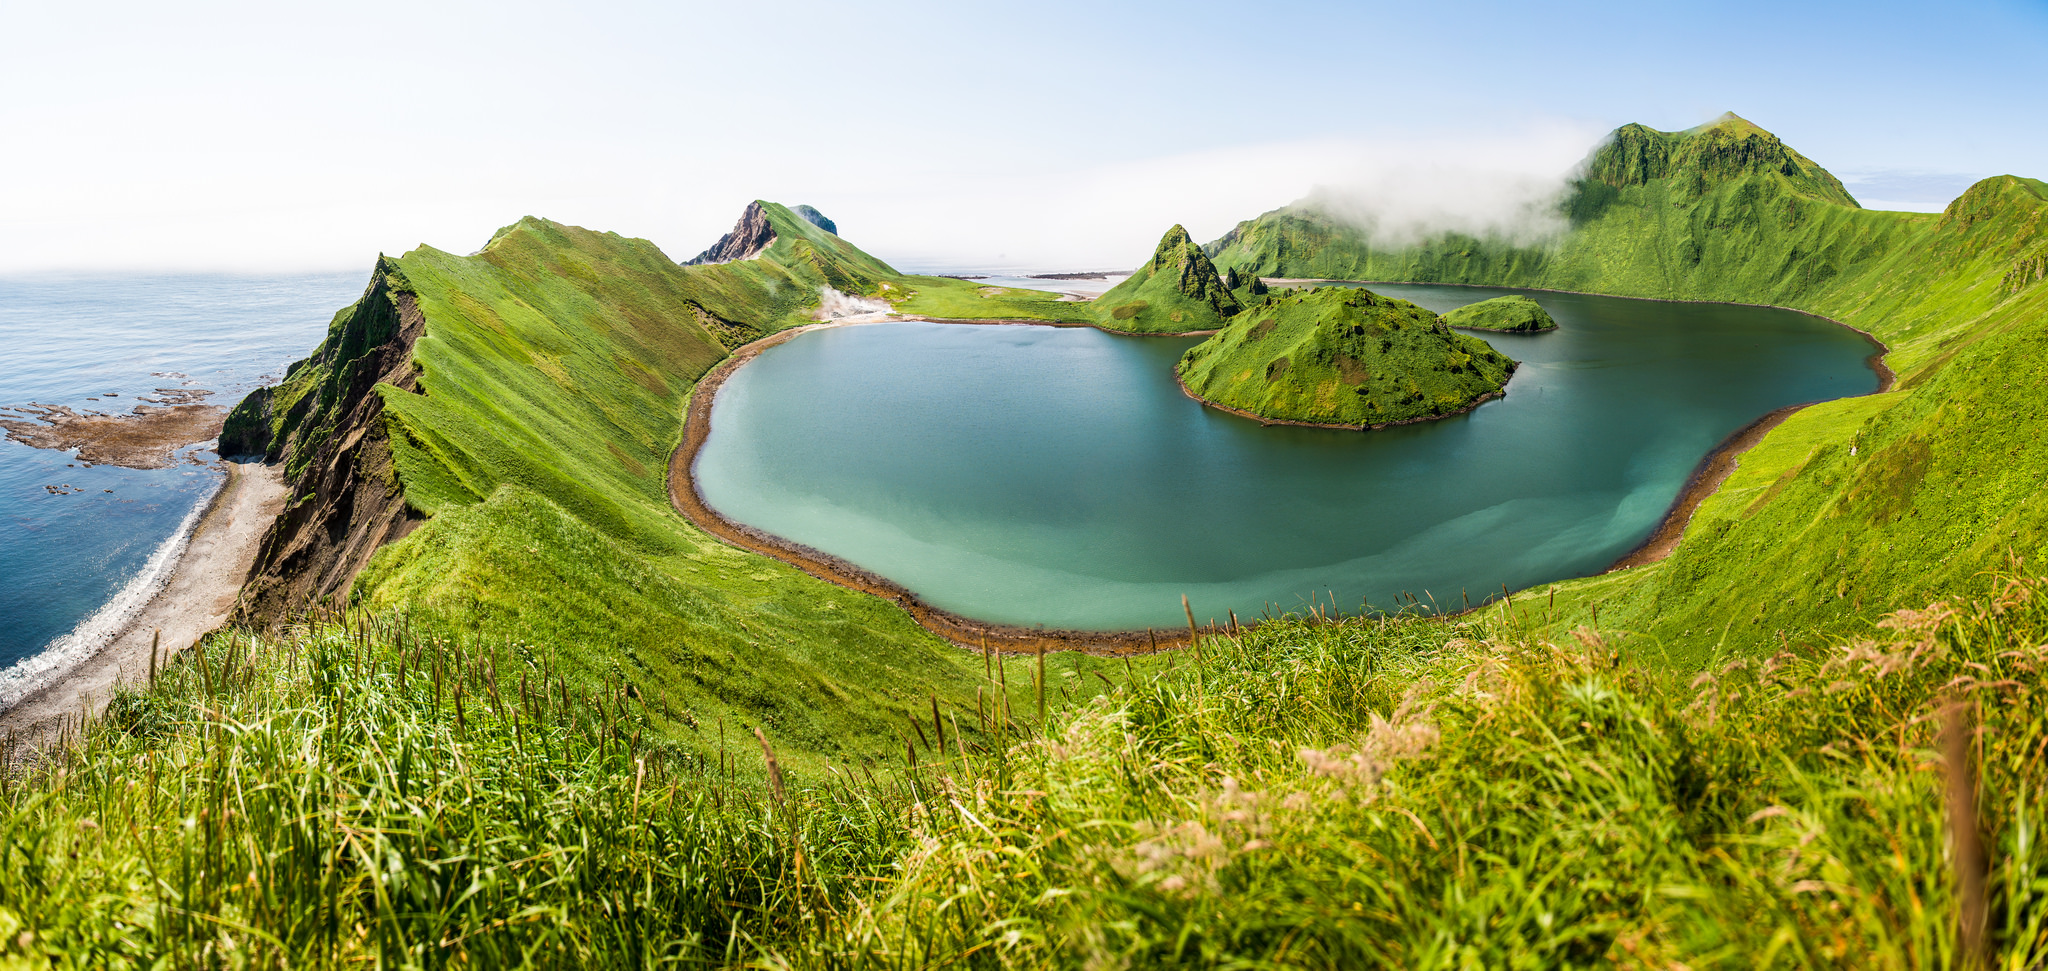 The Southern Kuril Islands have unspoilt nature.